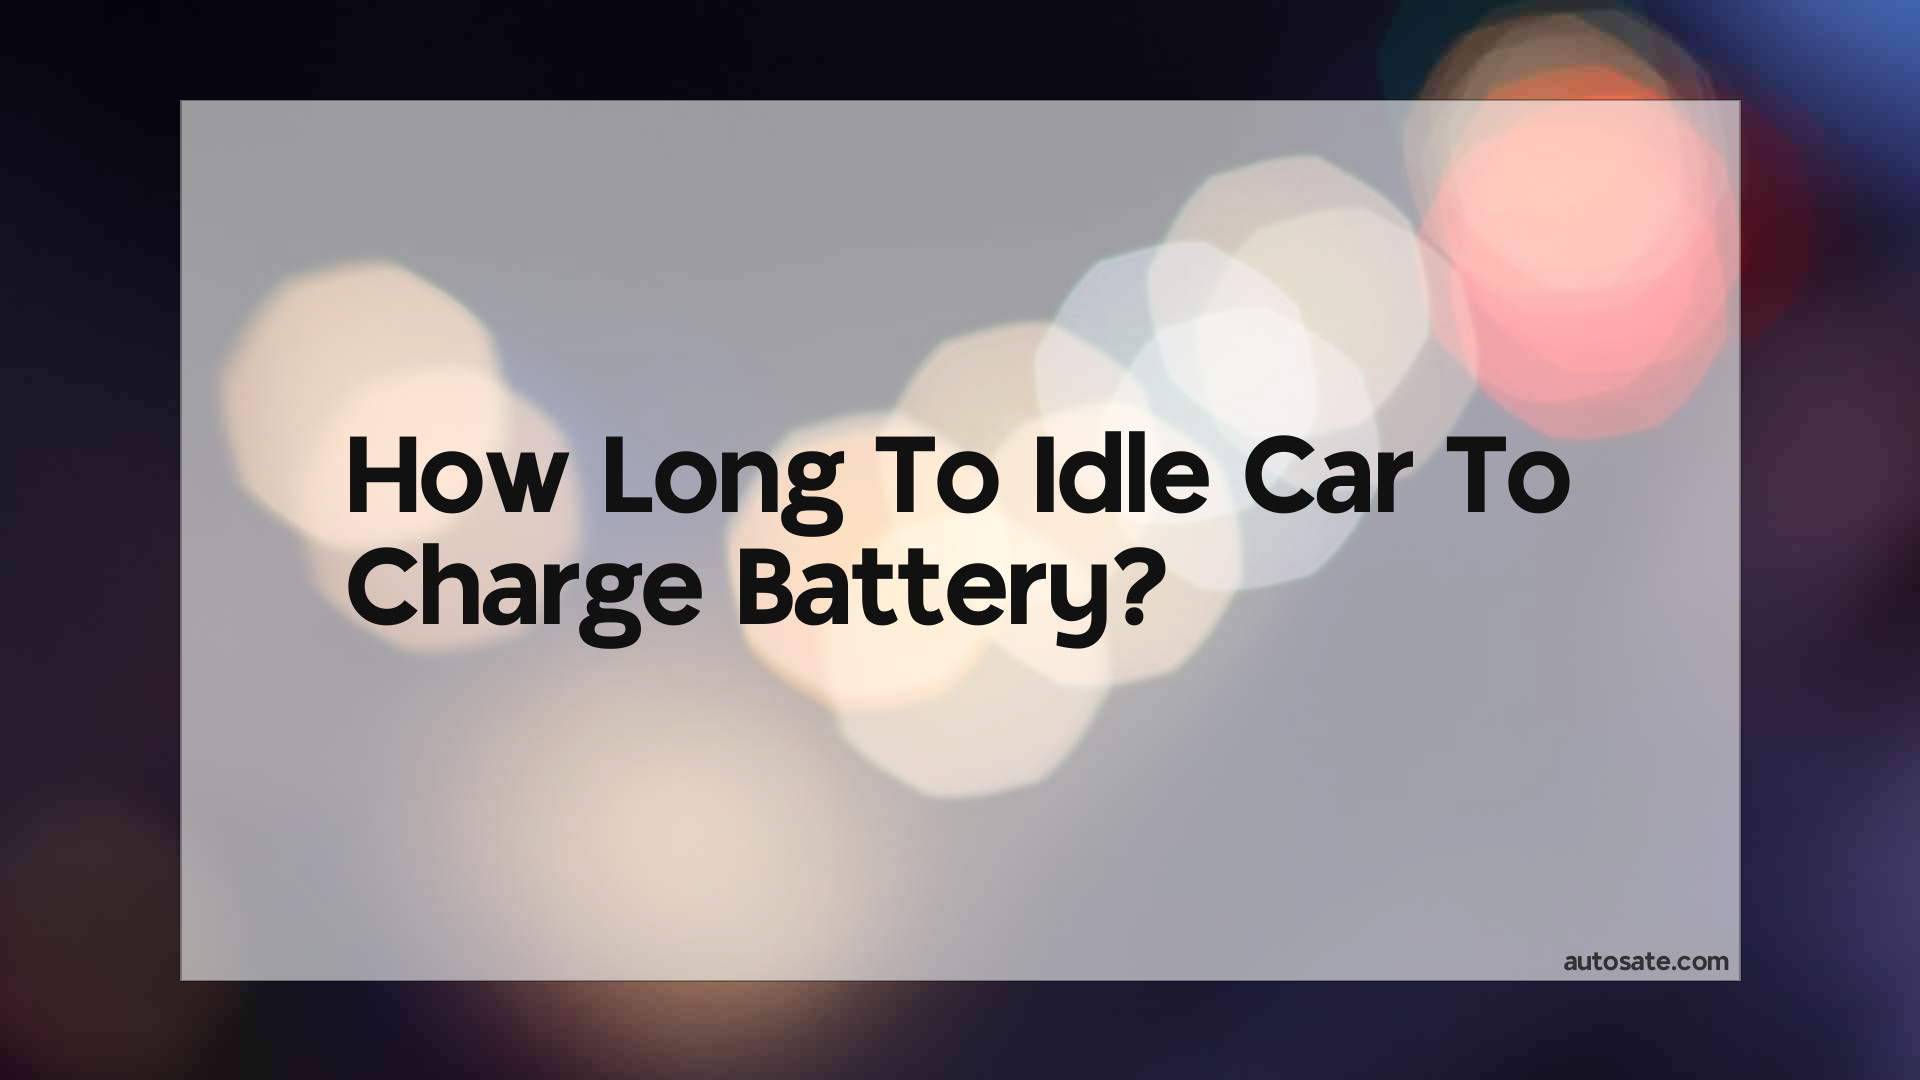 How Long To Idle Car To Charge Battery